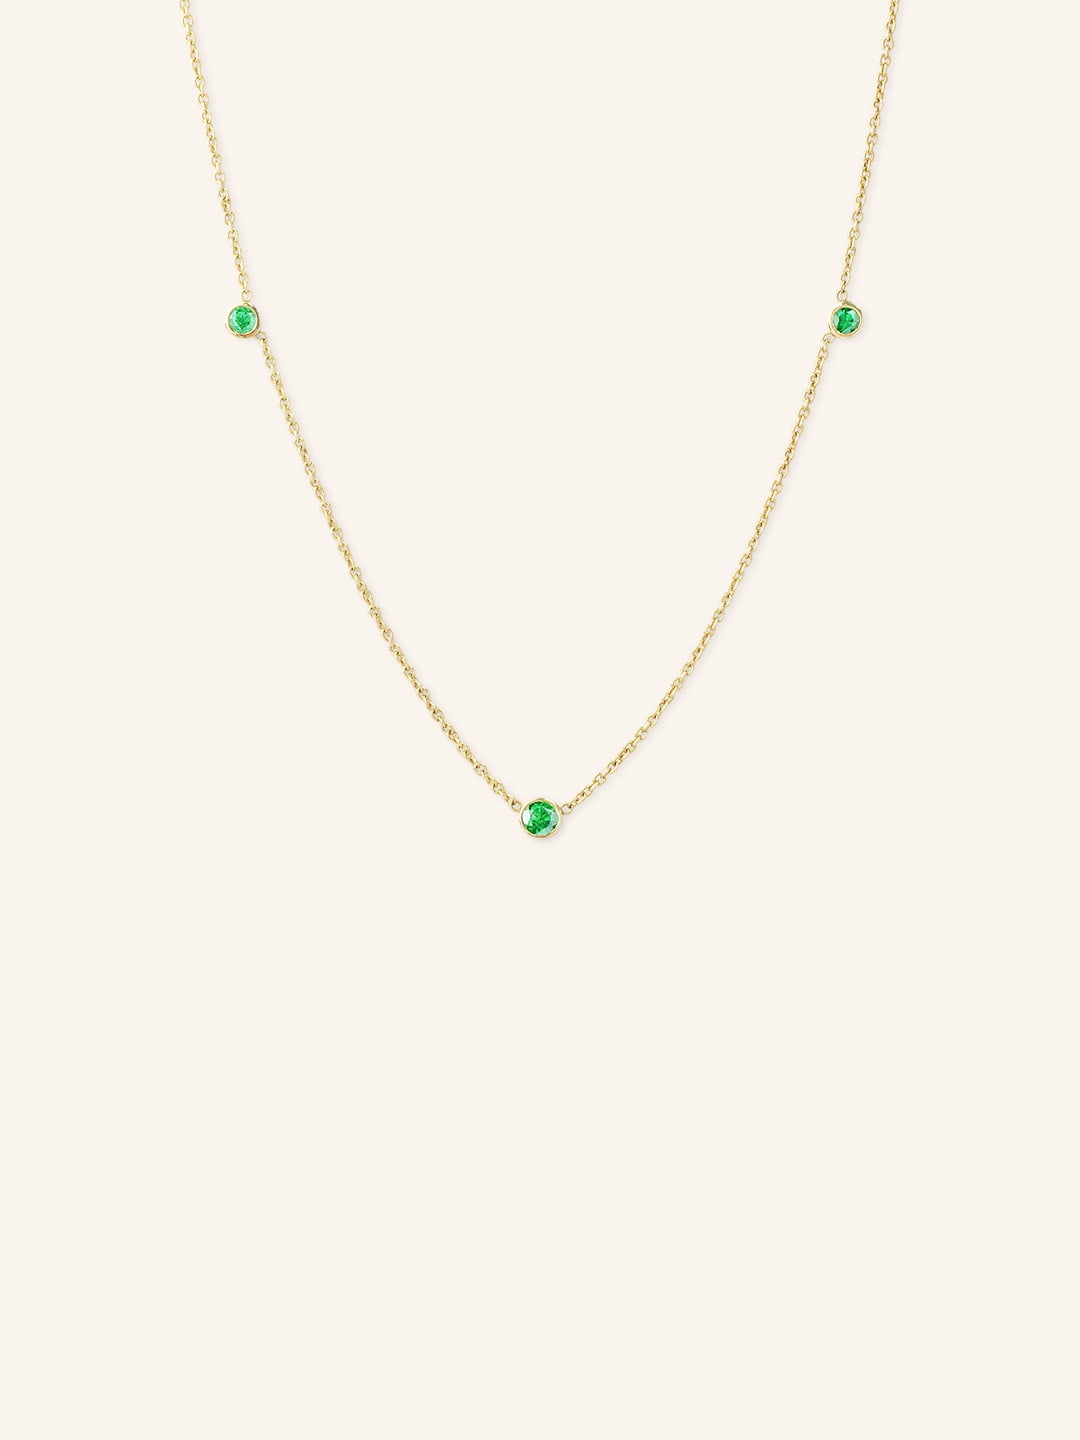 Orion's Emerald Necklace